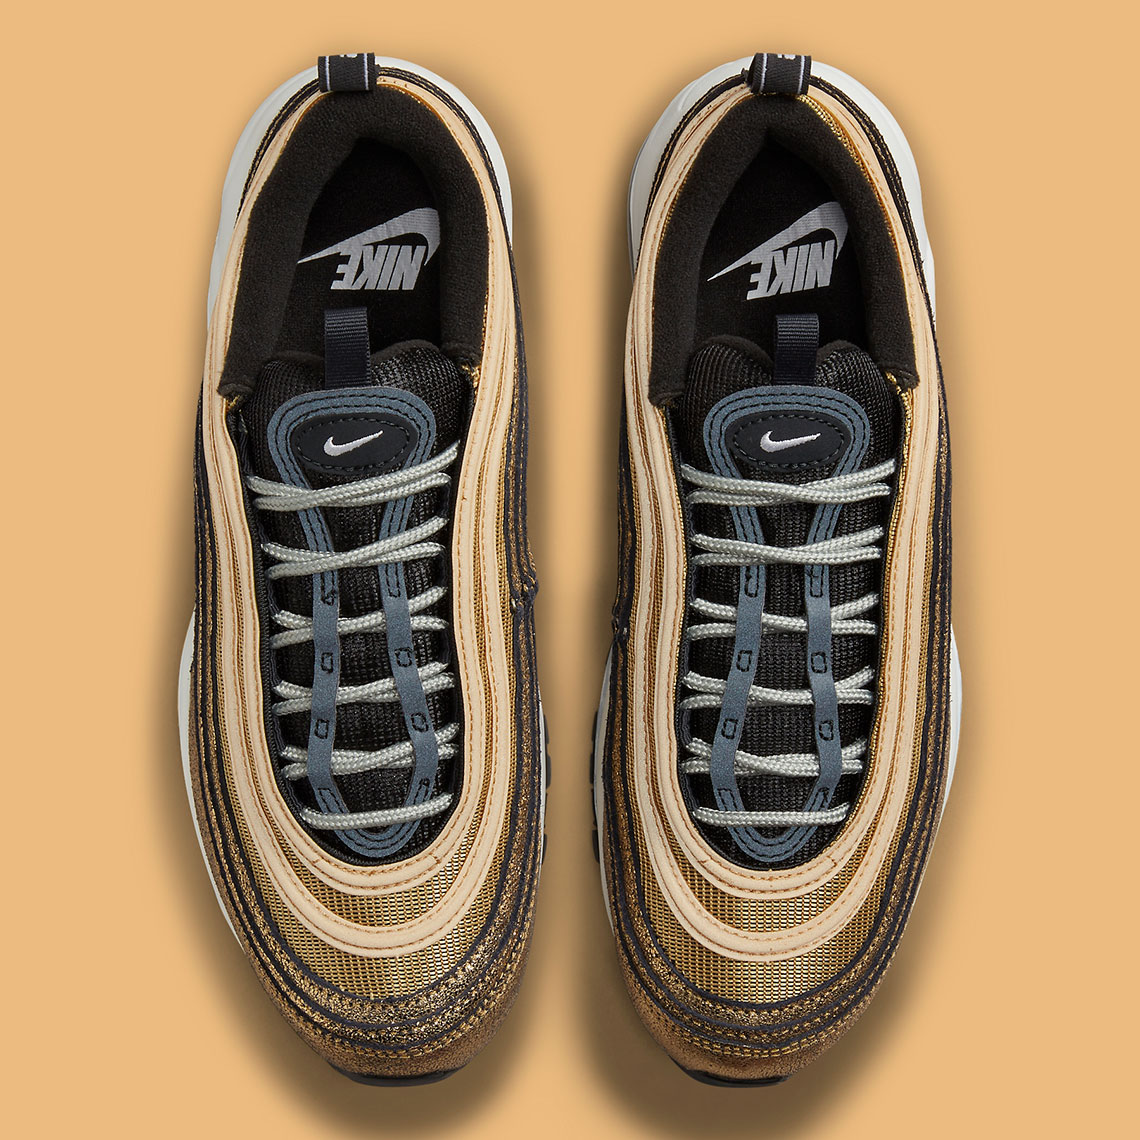 Nike Air Max 97 Cracked Gold Do5881 700 5